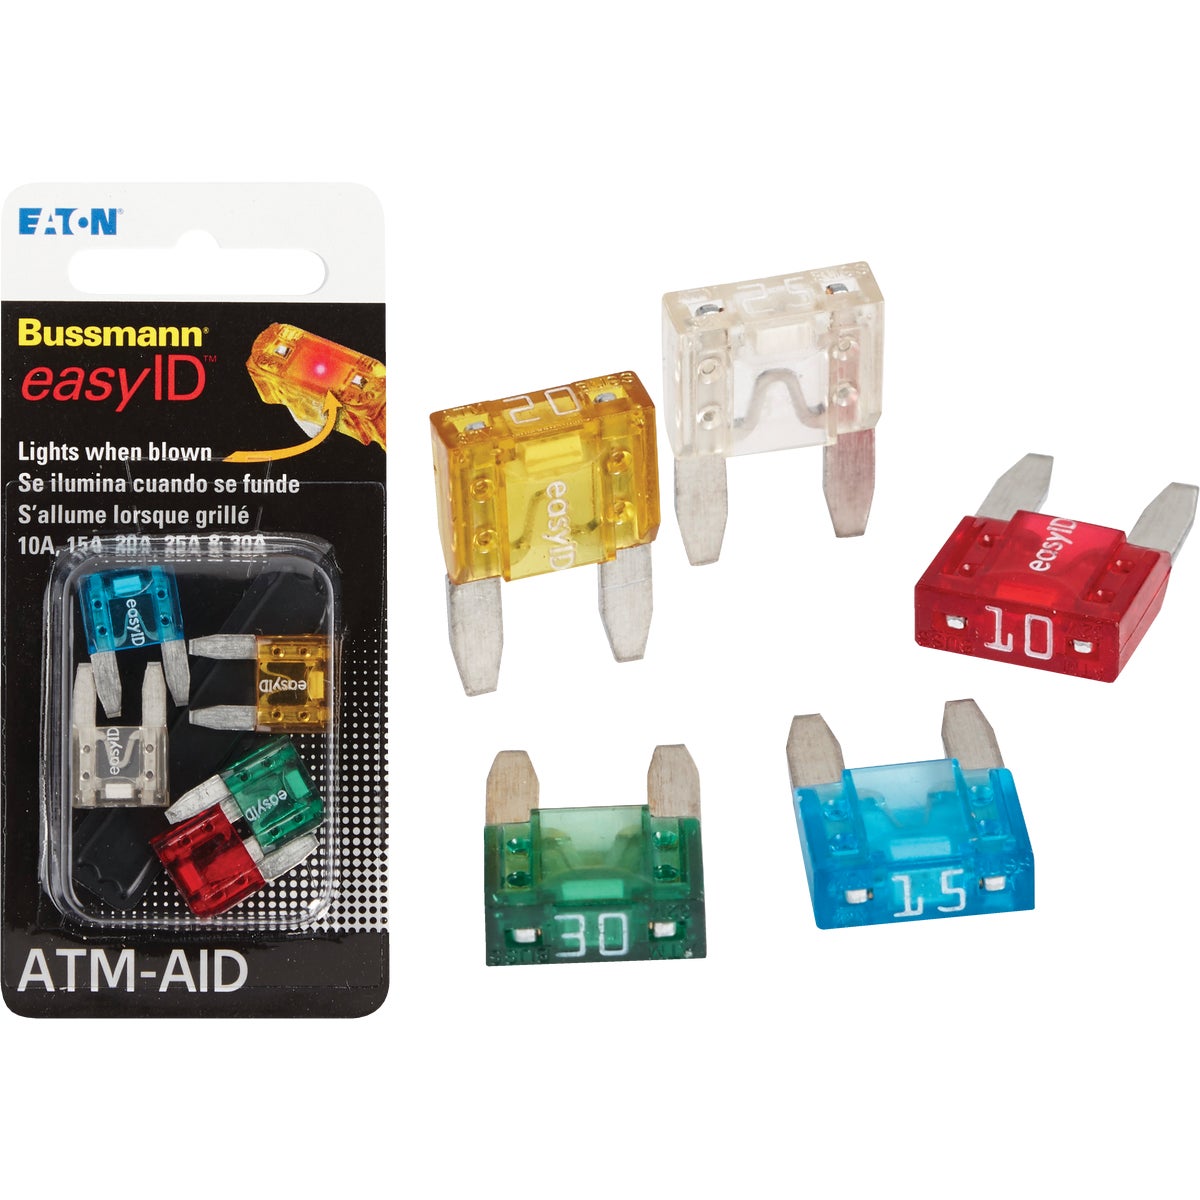 Item 583728, Contains 1 each of 5, 10, 15, 20, 25, and 30 amp easyID LED illuminating 